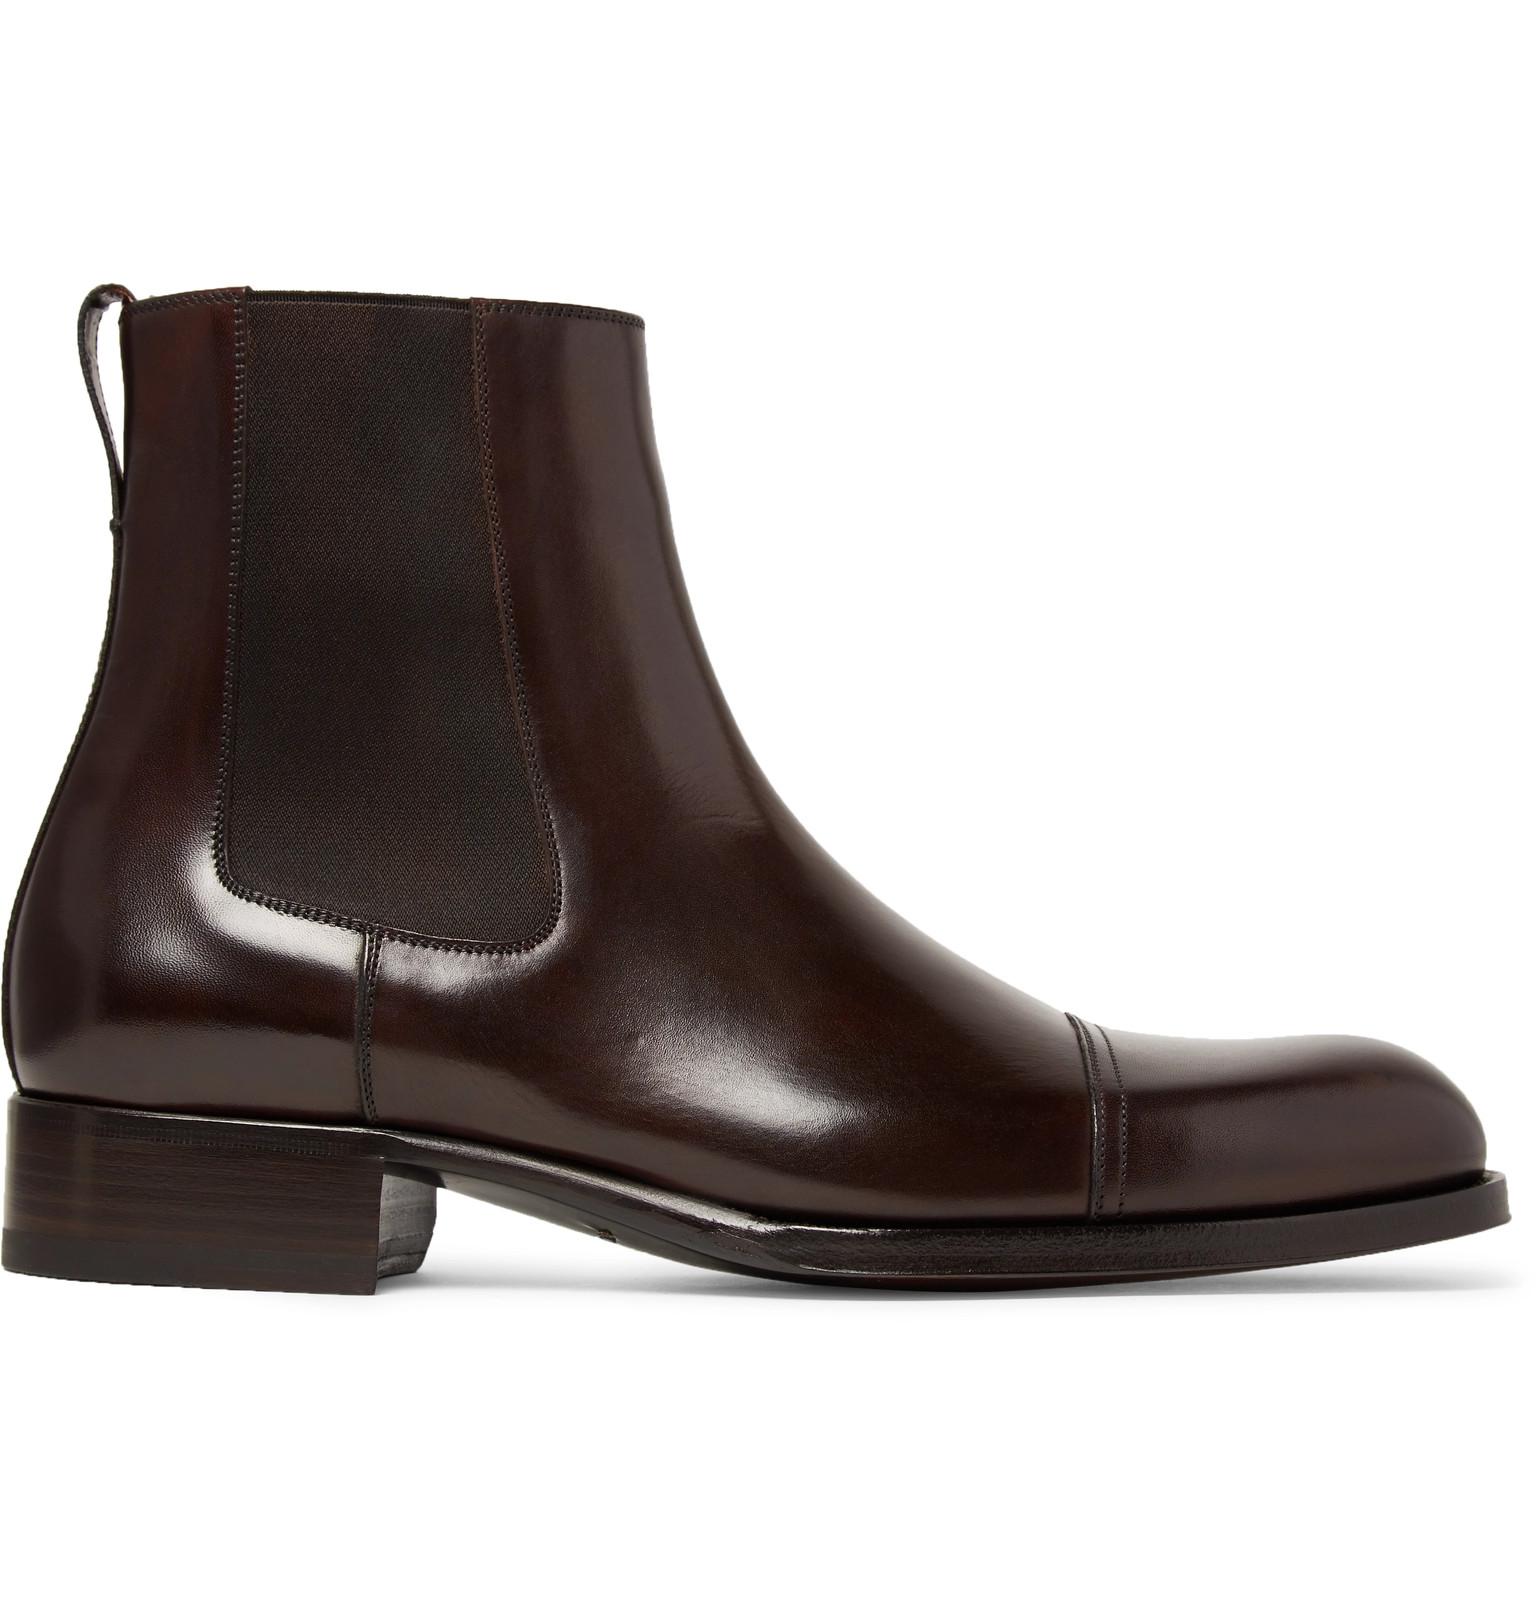 Tom Ford Edgar Cap-toe Polished-leather Chelsea Boots in Dark Brown ...